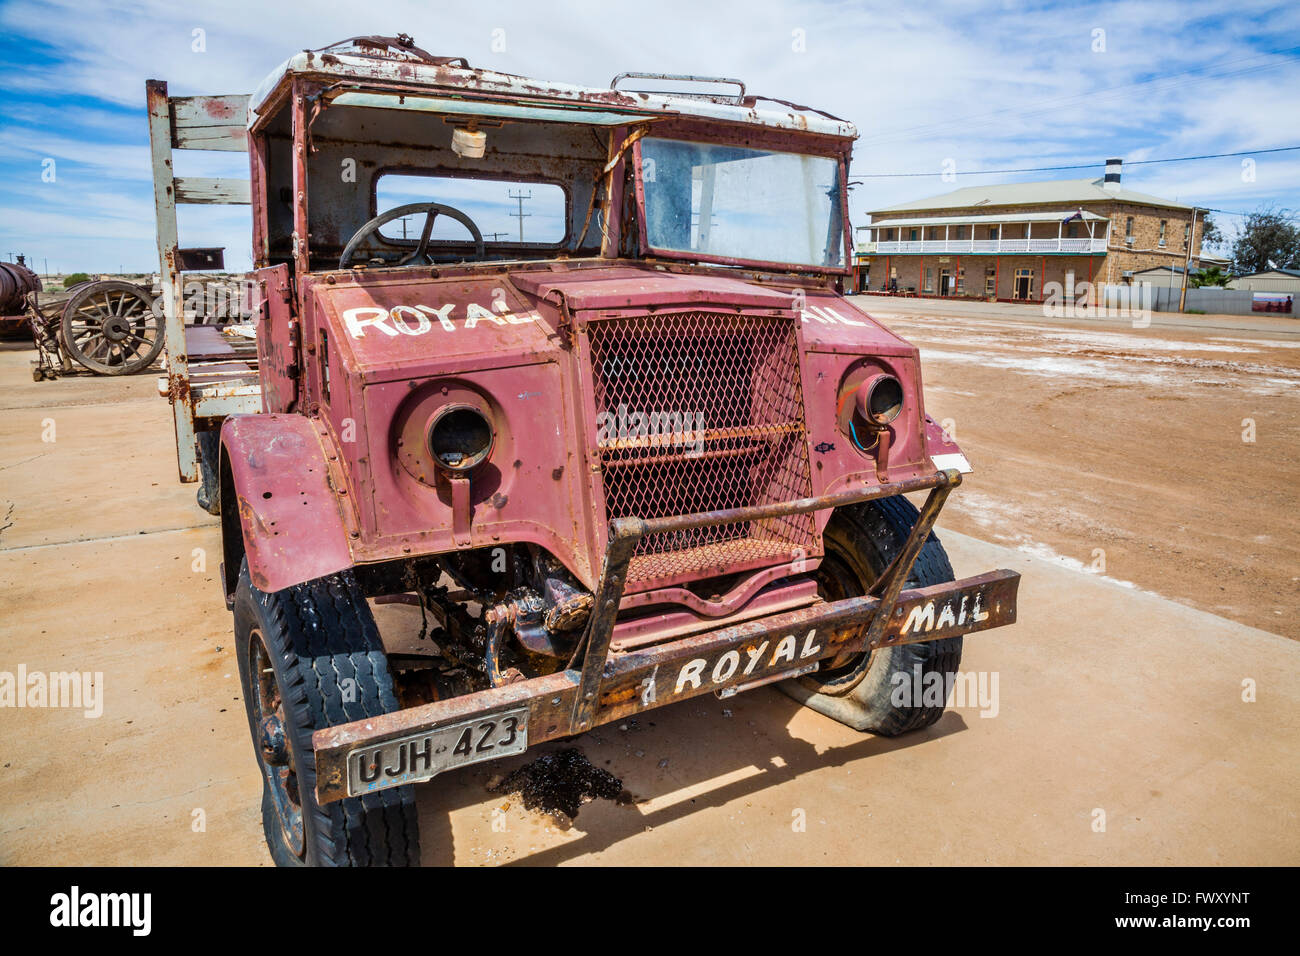 Marree in South Australia, Marree Hotel, vintage 1940s Chevrolet Blitz truck as it was used by Tom Kruse, the outback mailman Stock Photo